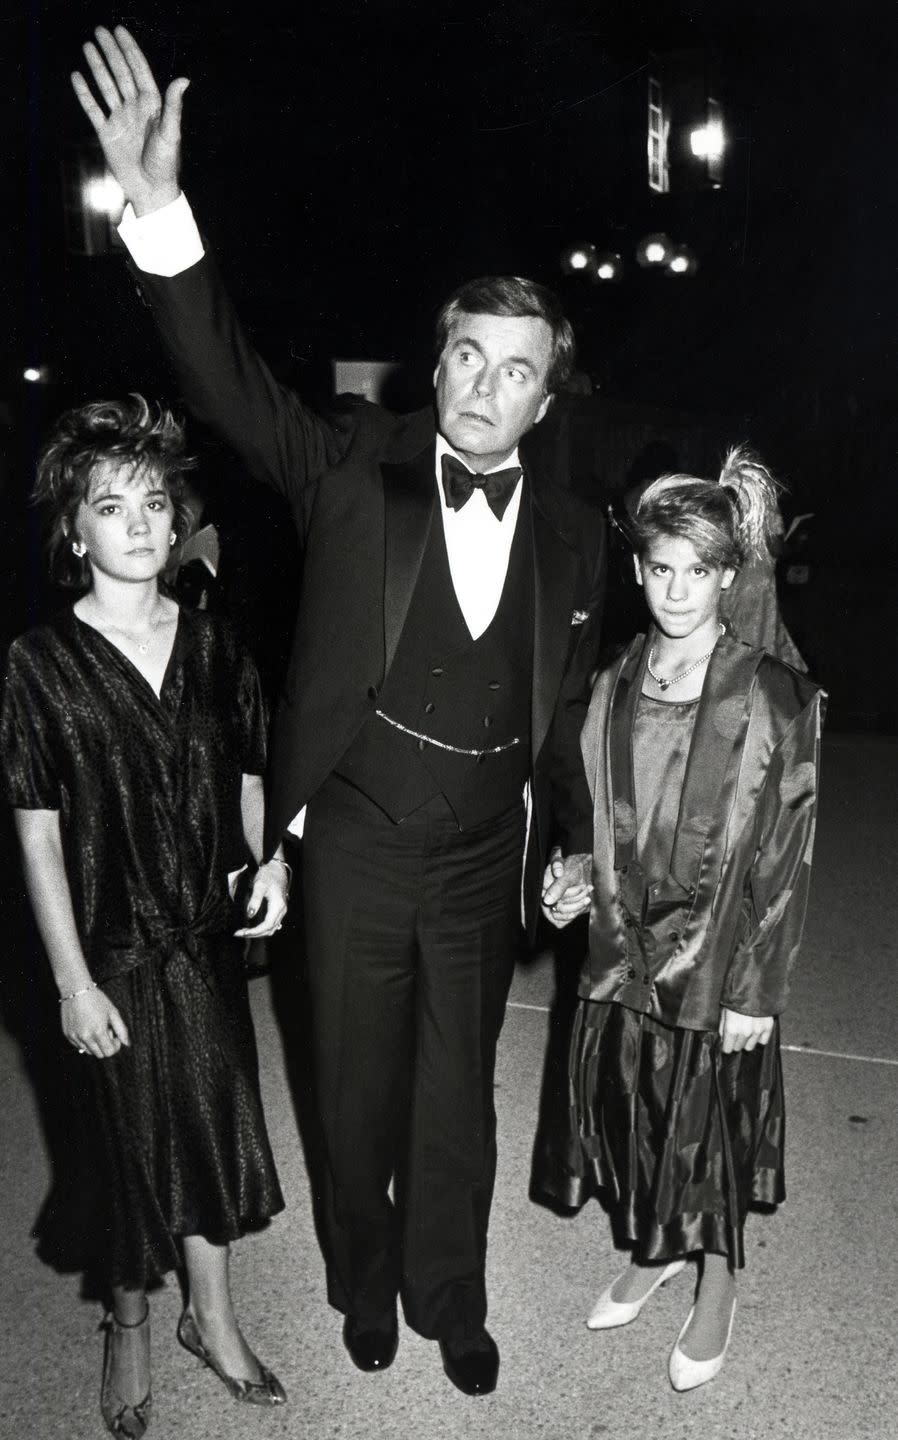 <p>After the tragic death of his wife, Natalie Wood, Robert Wagner was responsible for raising their daughter Natasha Wagner (left). Here, the actor attends the 37th Emmy awards with his daughter and her friend. </p>